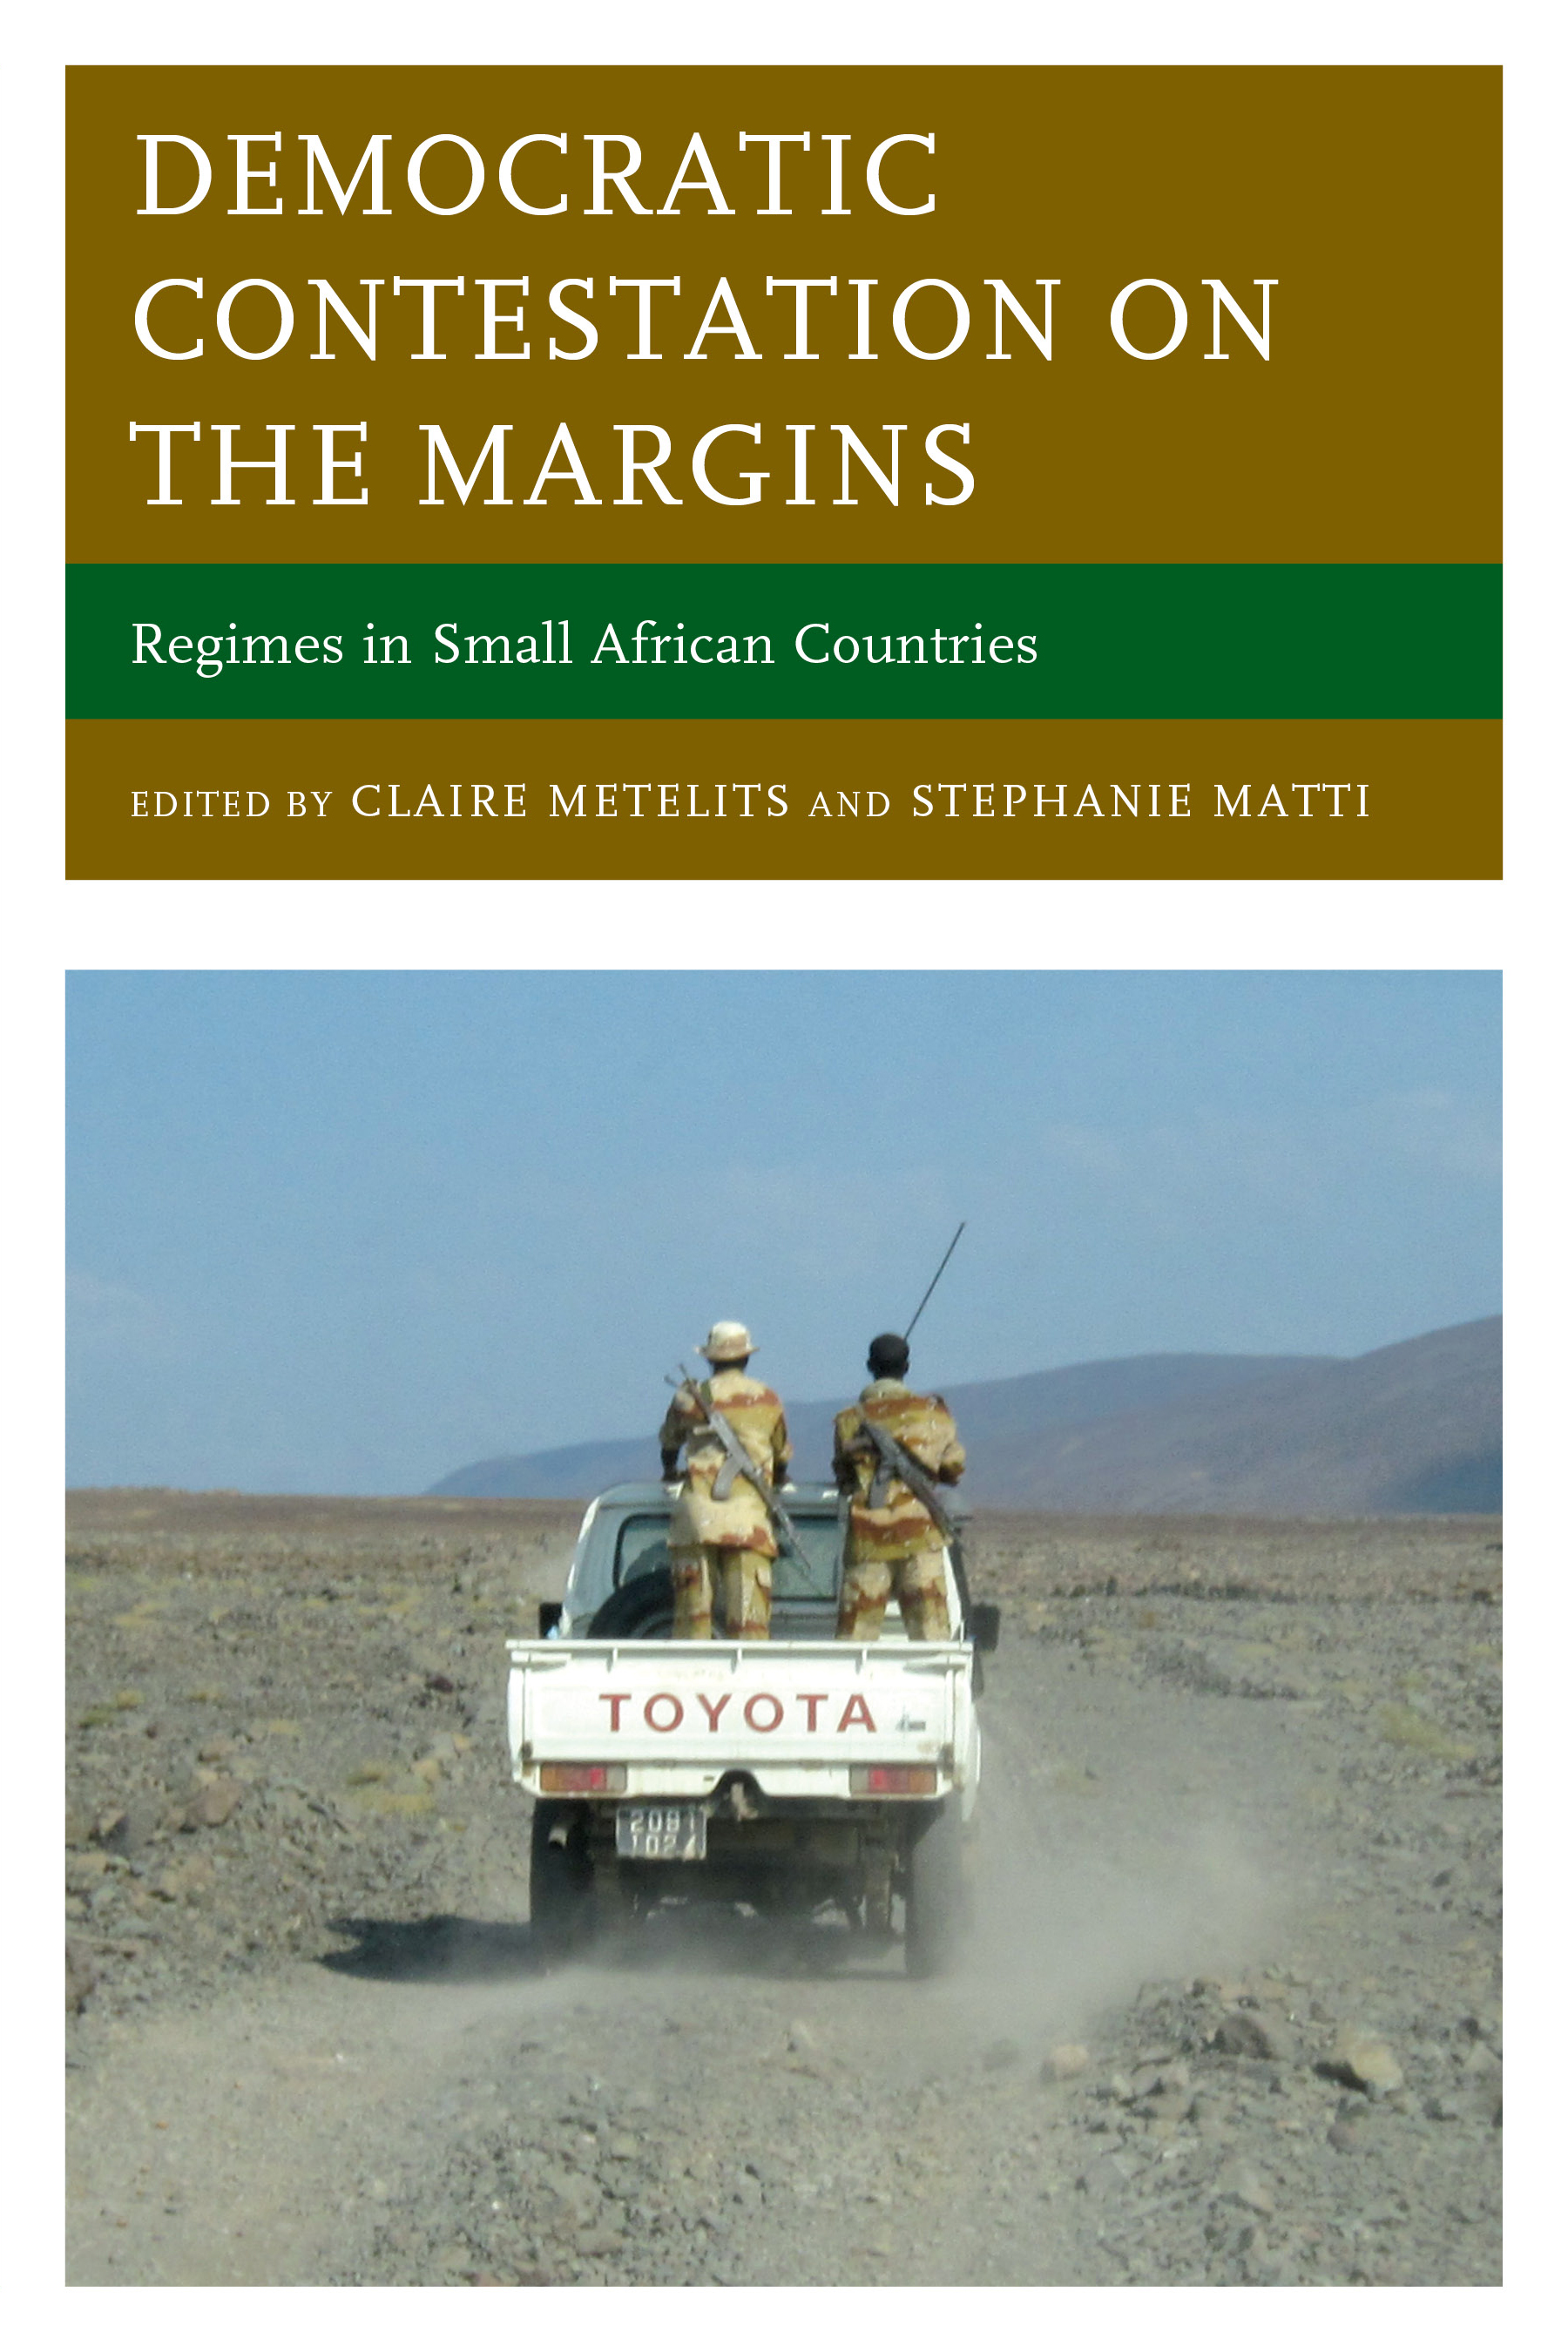 Democratic Contestation on the Margins: Regimes in Small African Countries